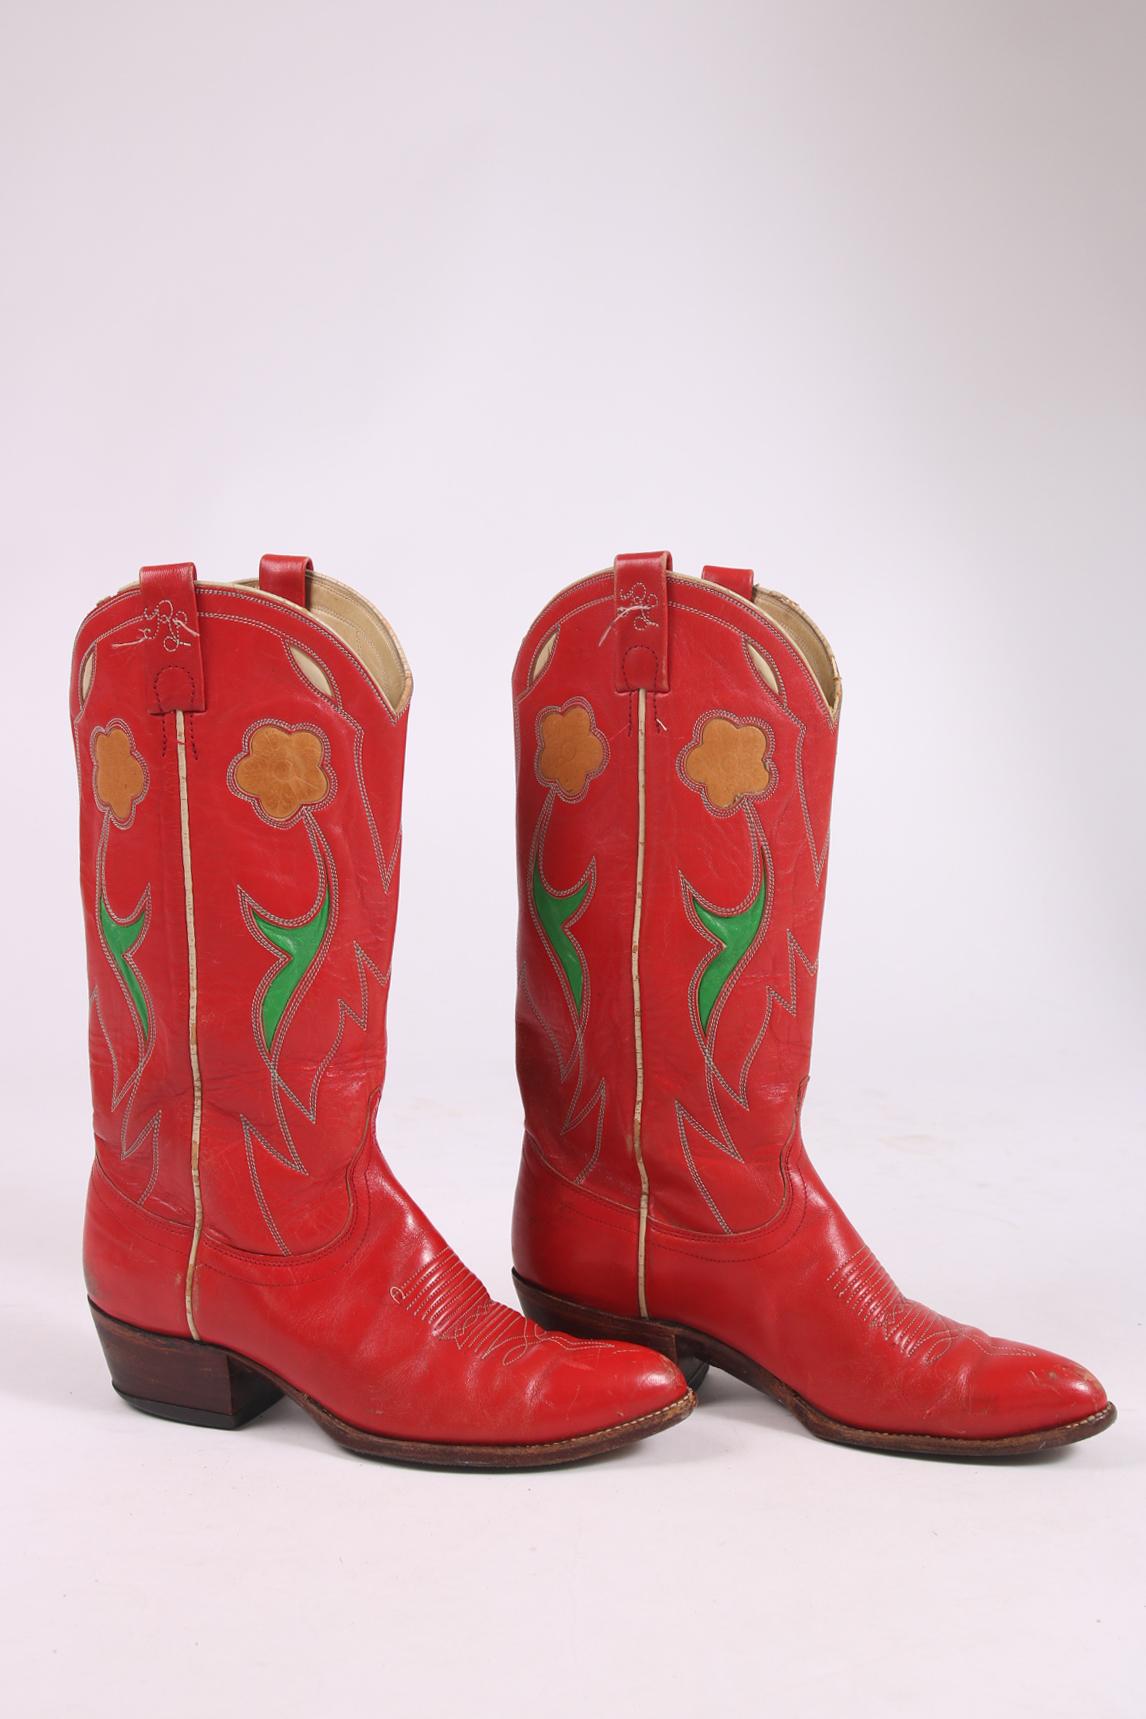 1980's Ralph Lauren red leather cowboy books with yellow and green leather flower motif. In good to very good condition with wear commensurate with age - the soles are worn and most likely could benefit from being replaced. Women's size 